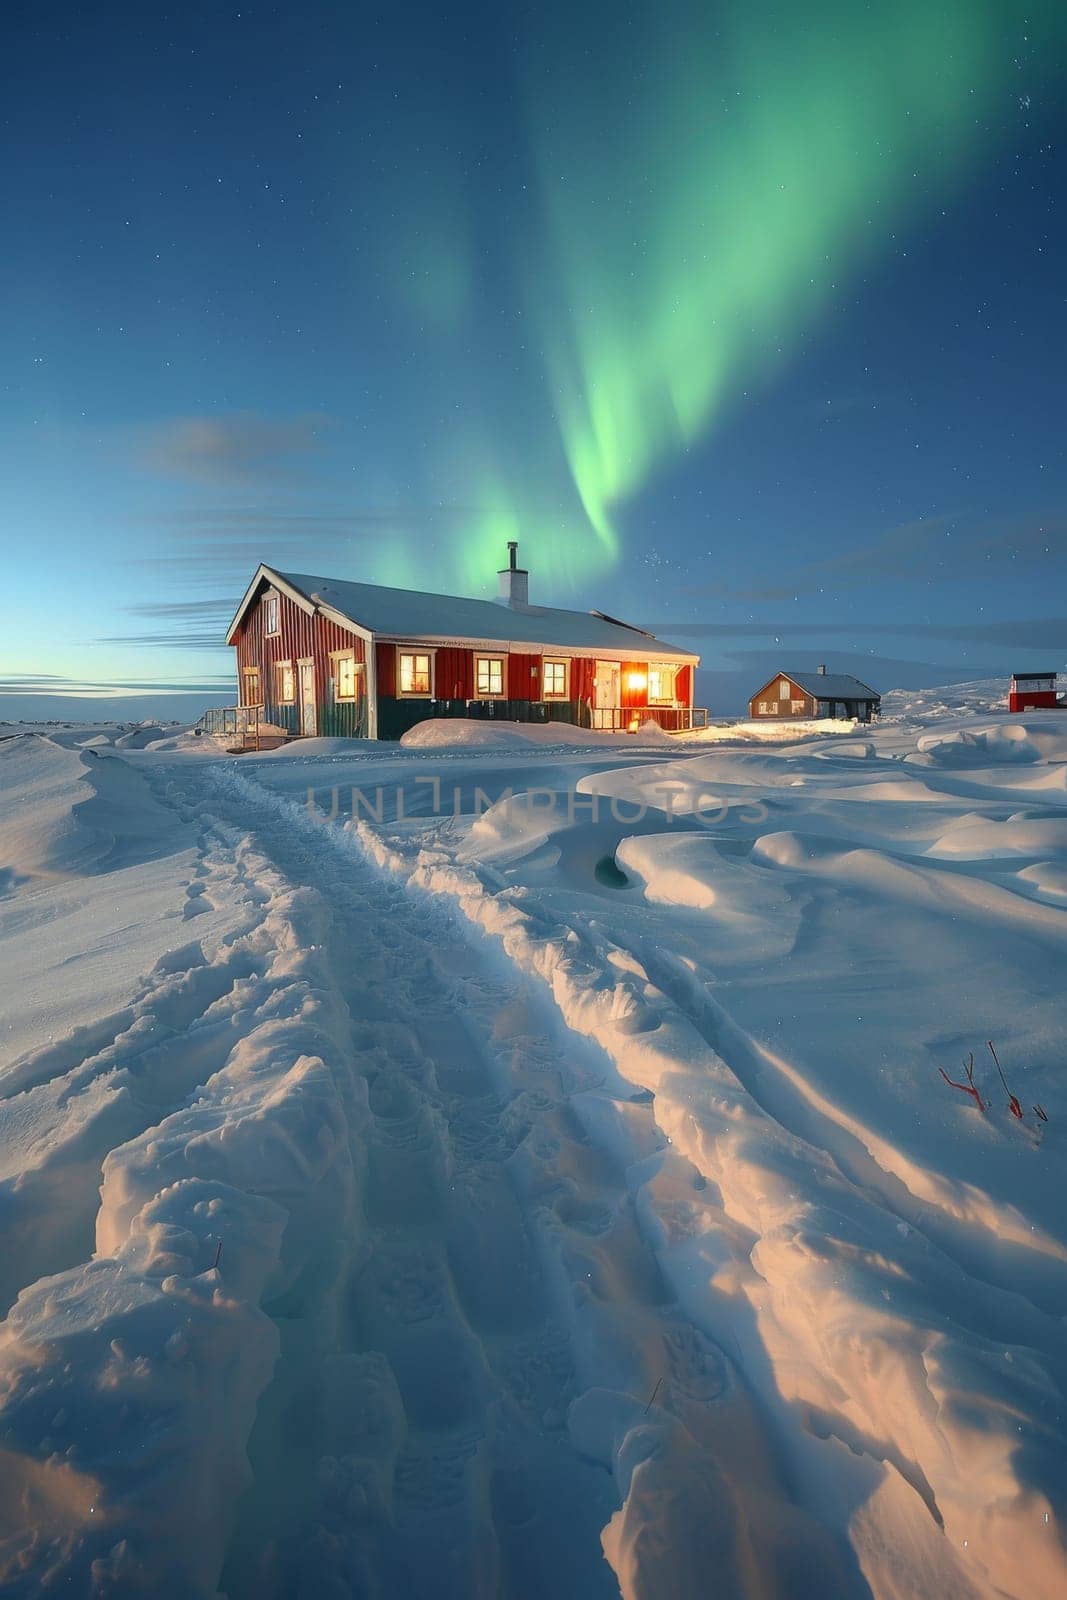 A house with a red roof and a green aurora in the sky. The aurora is bright and colorful, creating a sense of wonder and awe. The house is surrounded by snow, which adds to the peaceful